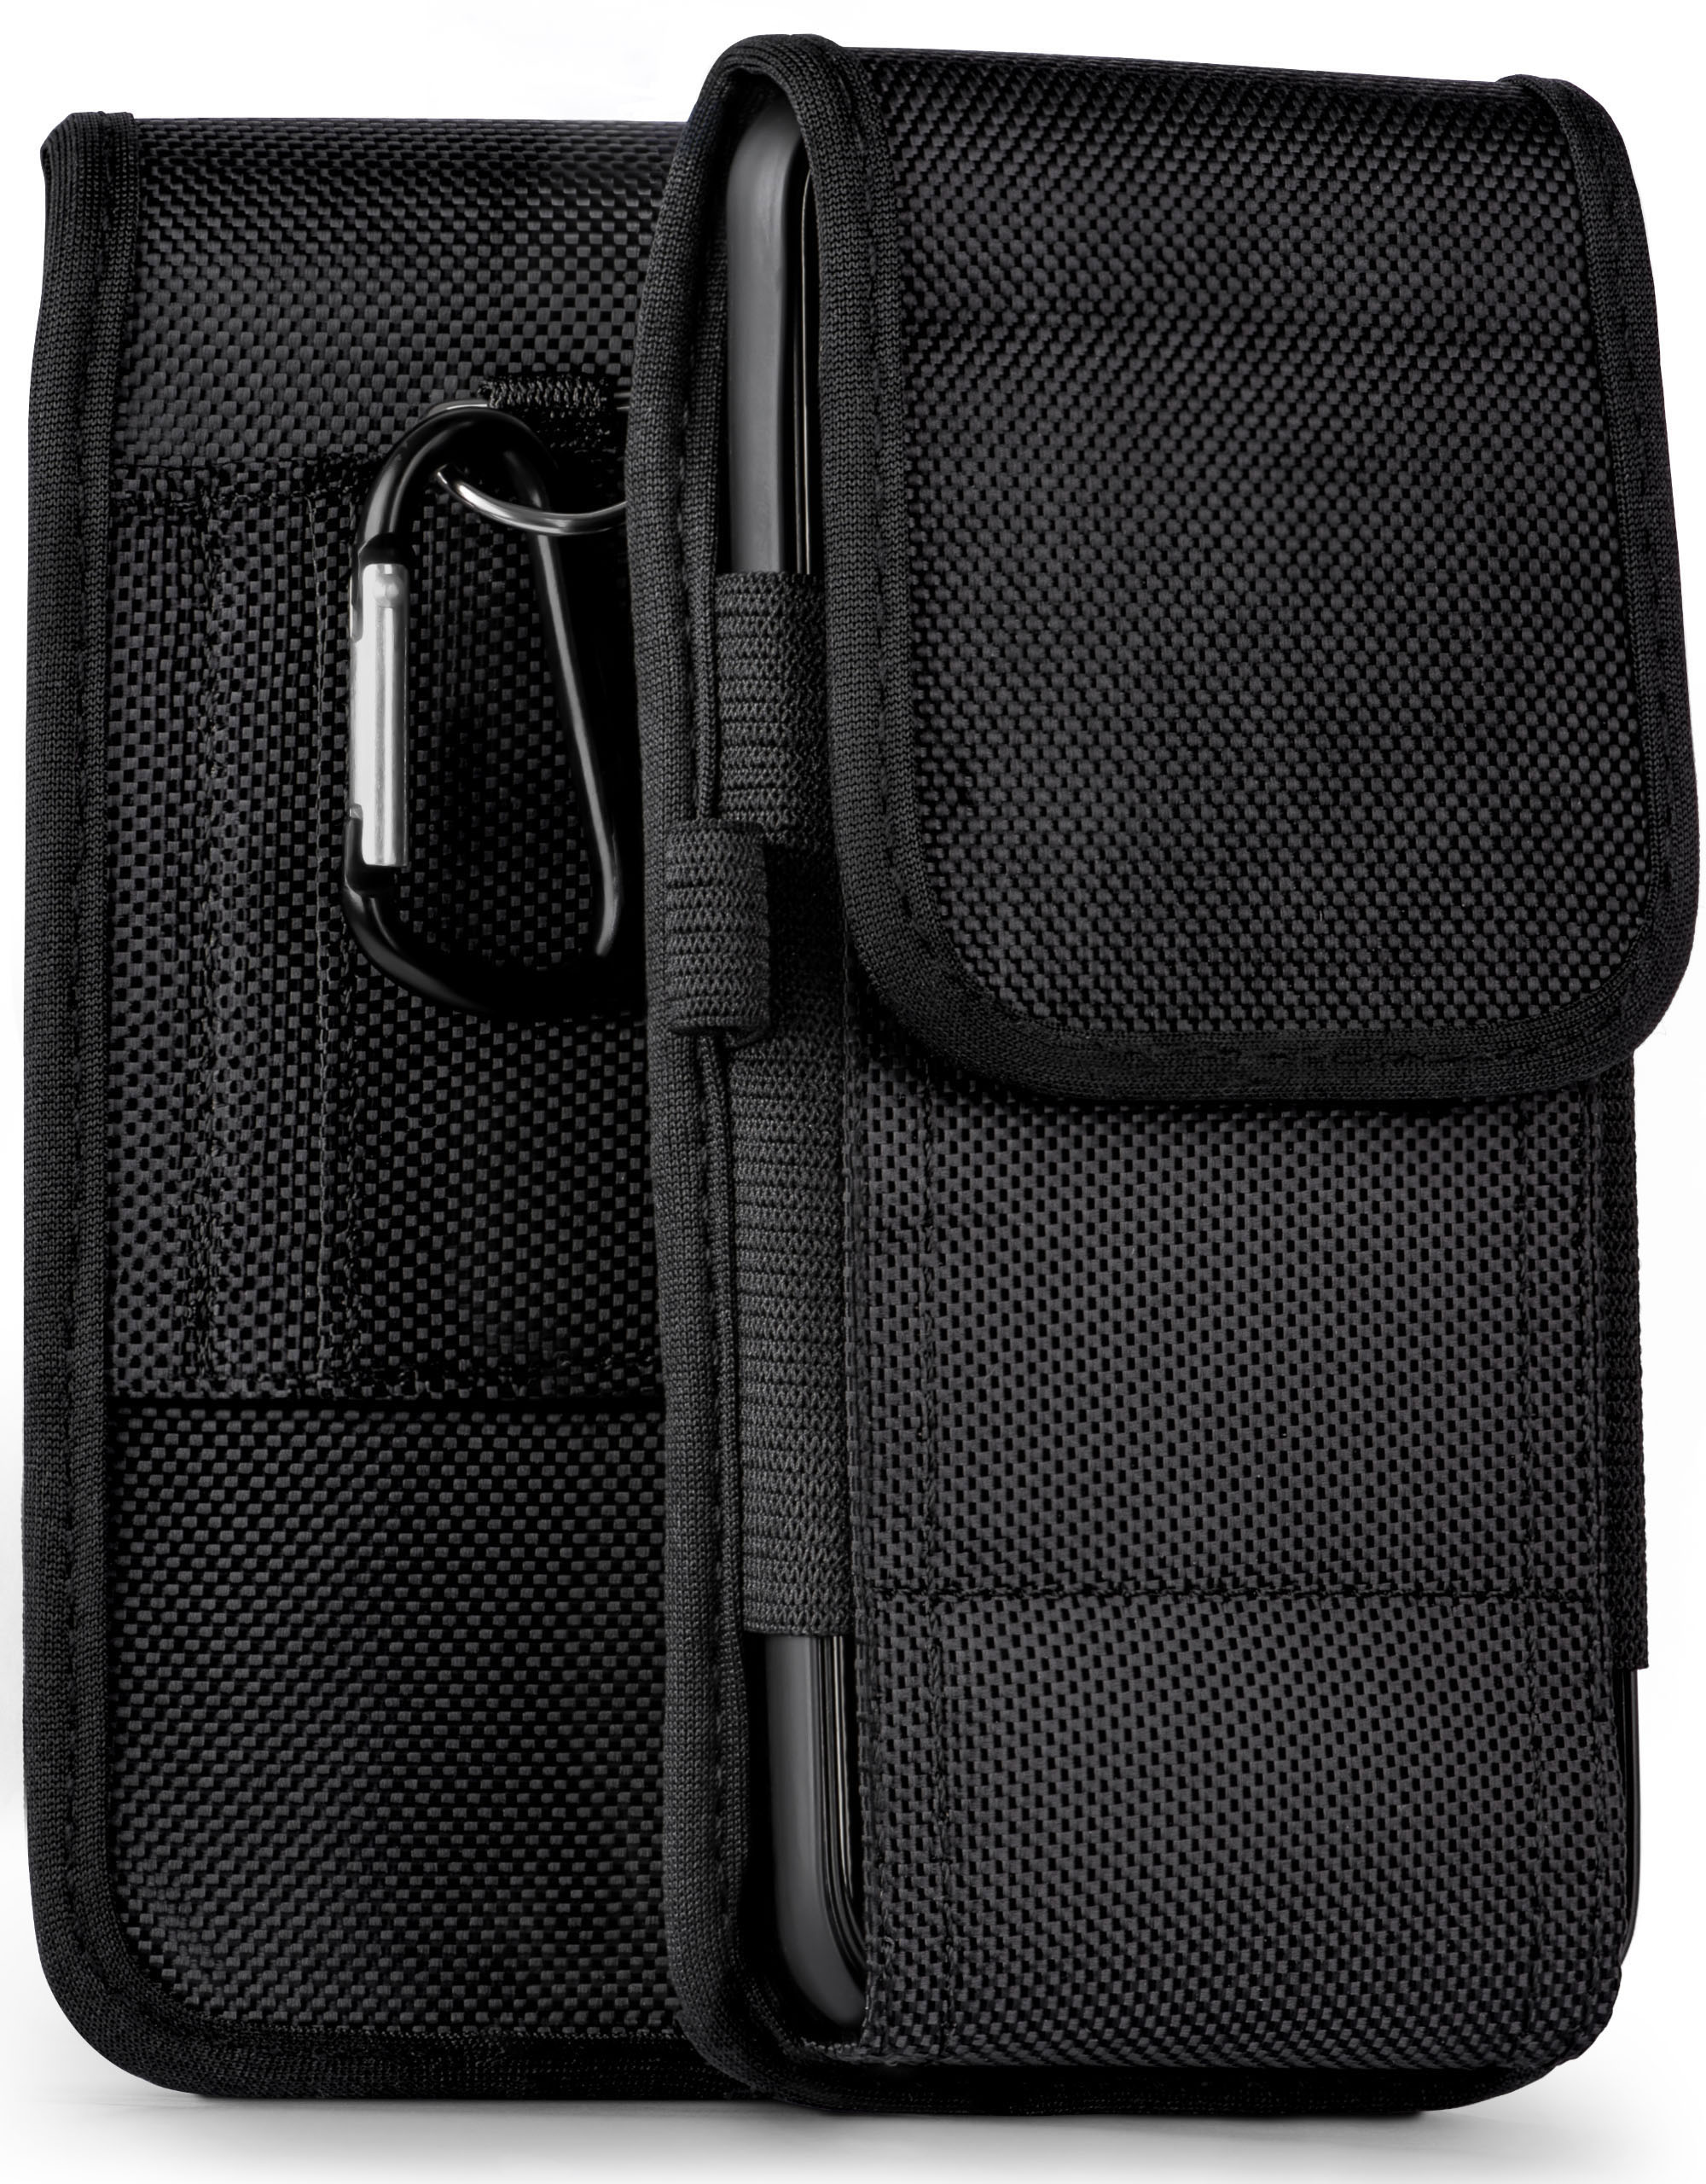 Trail 12, Case, Holster, Desire HTC, MOEX Agility